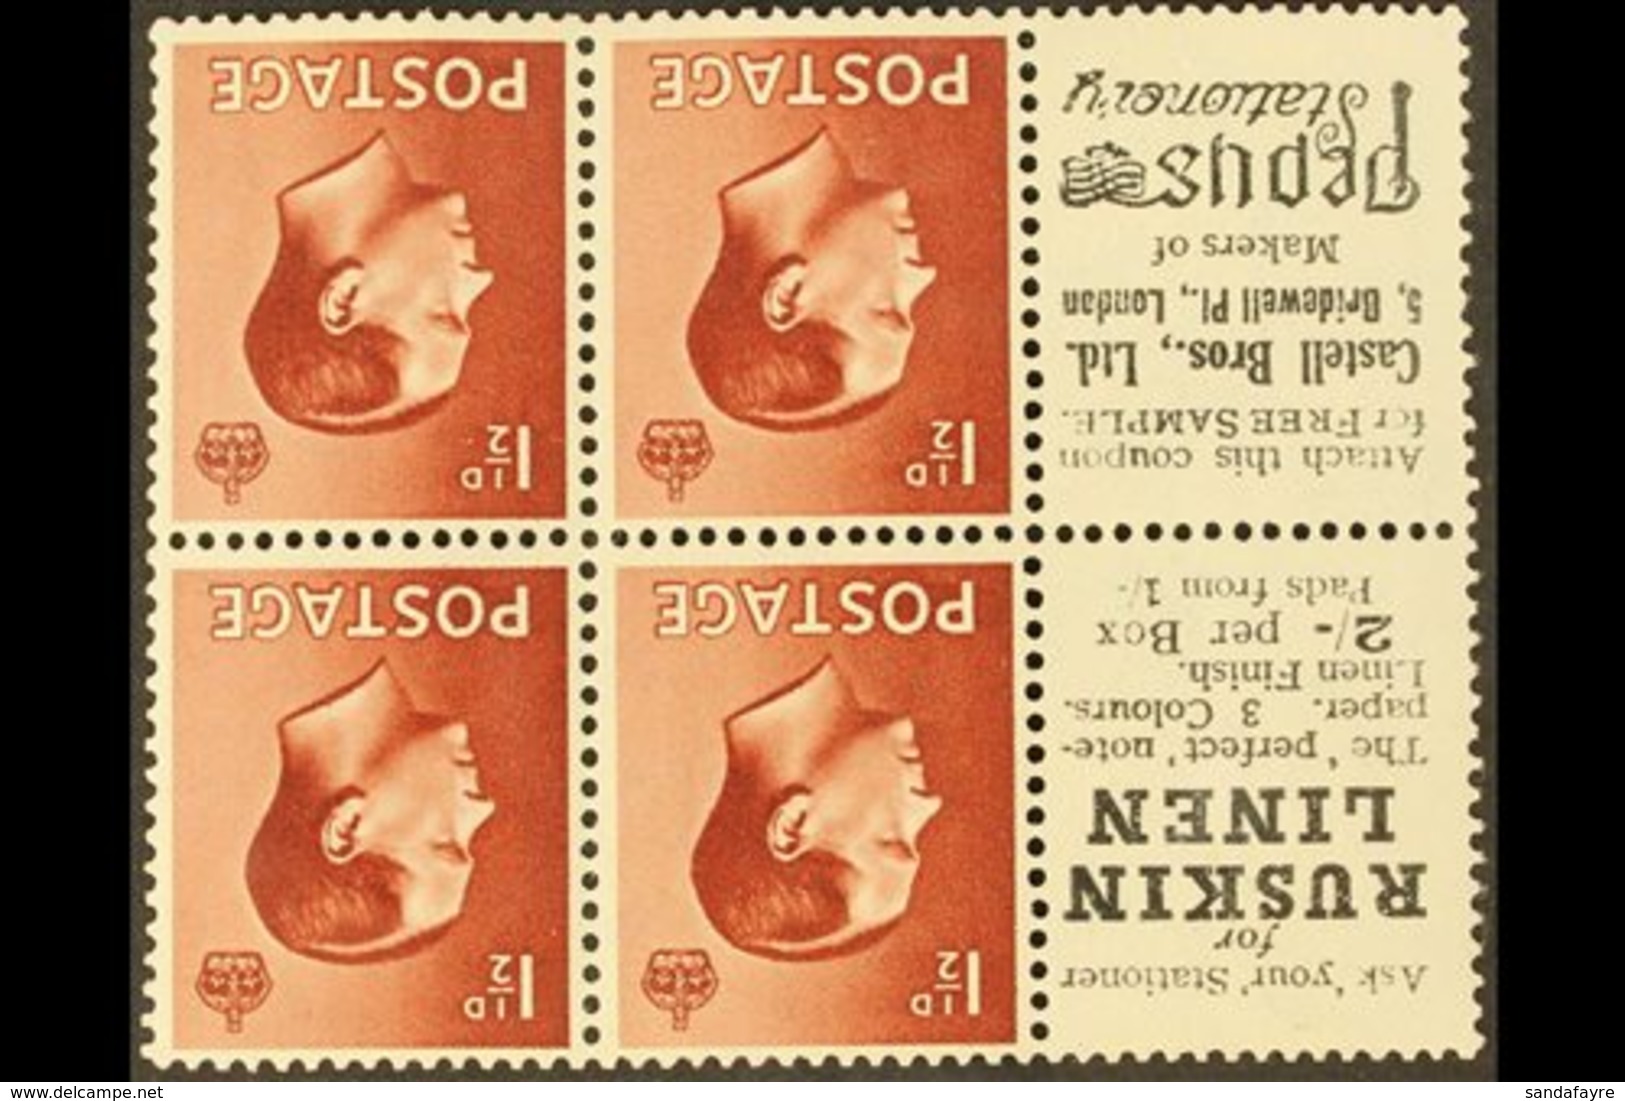 \Y BOOKLET PANES WITH ADVERTISING LABELS\Y 1½d Red Brown Booklet Panes Of 4 With 2 Advertising Labels (Ruskin Linen), SG - Unclassified